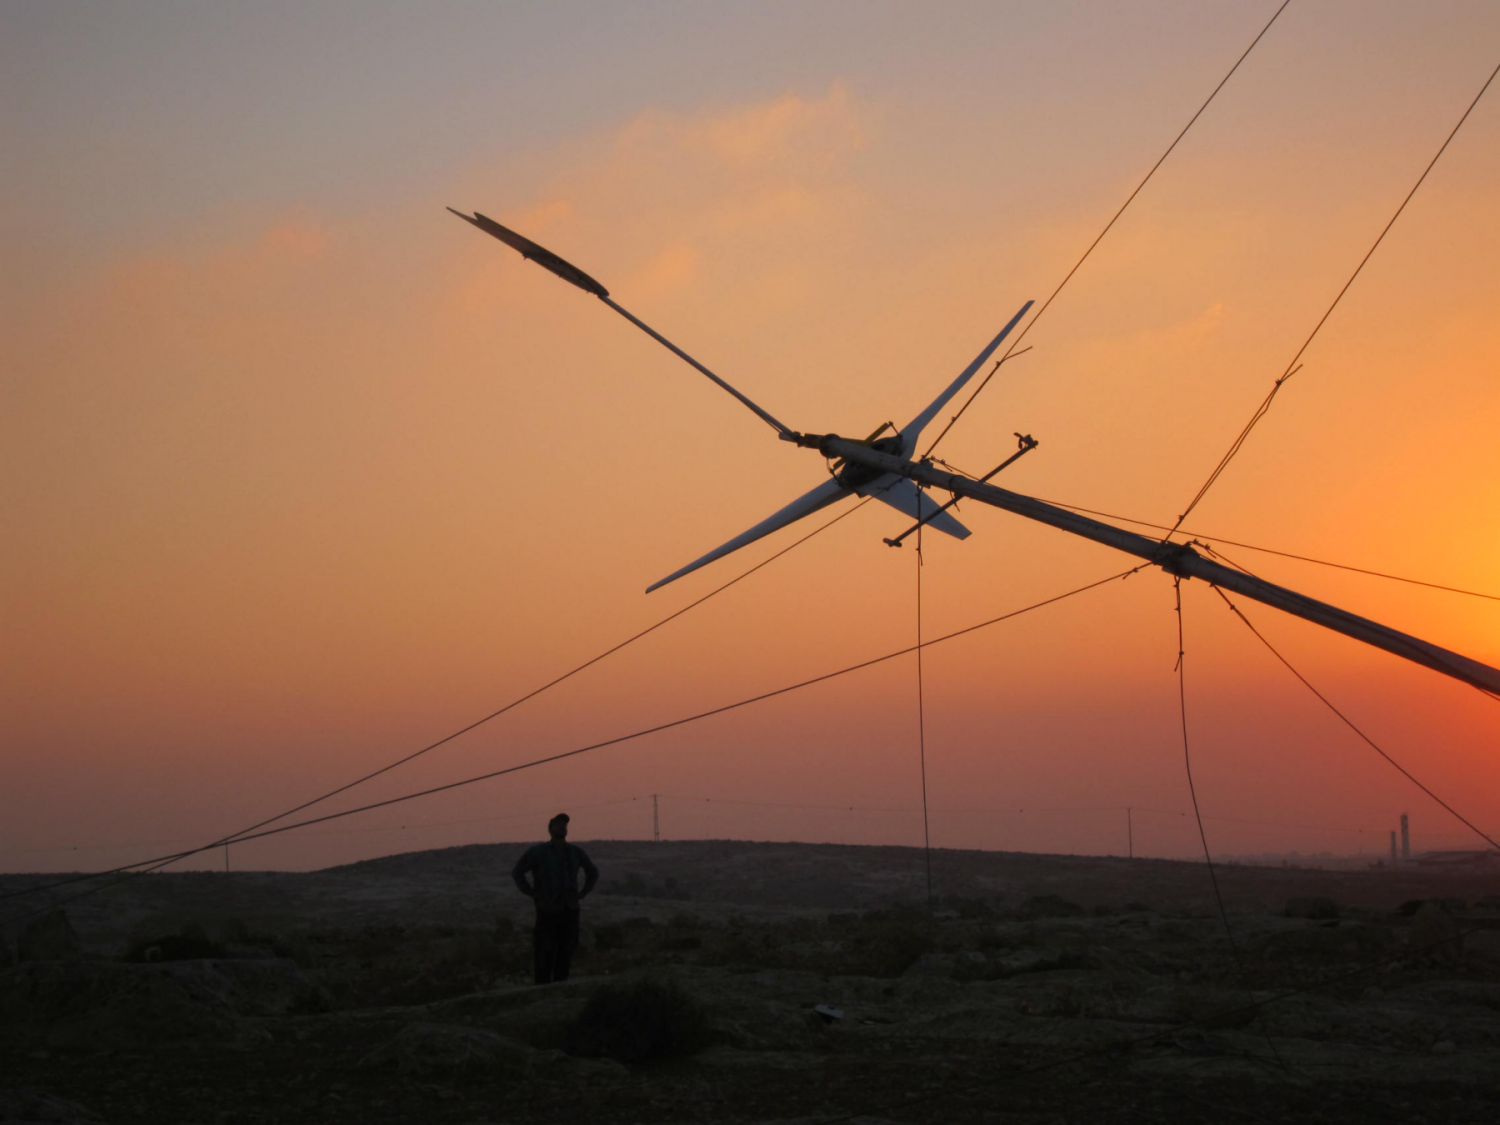 The team often erect turbines at night to avoid confrontation with the Israeli authorities who have previously halted installations. The region, also known as South Mount Hebron, is ideally suited for wind energy: in the afternoon, as the sun goes down, the wind picks up
